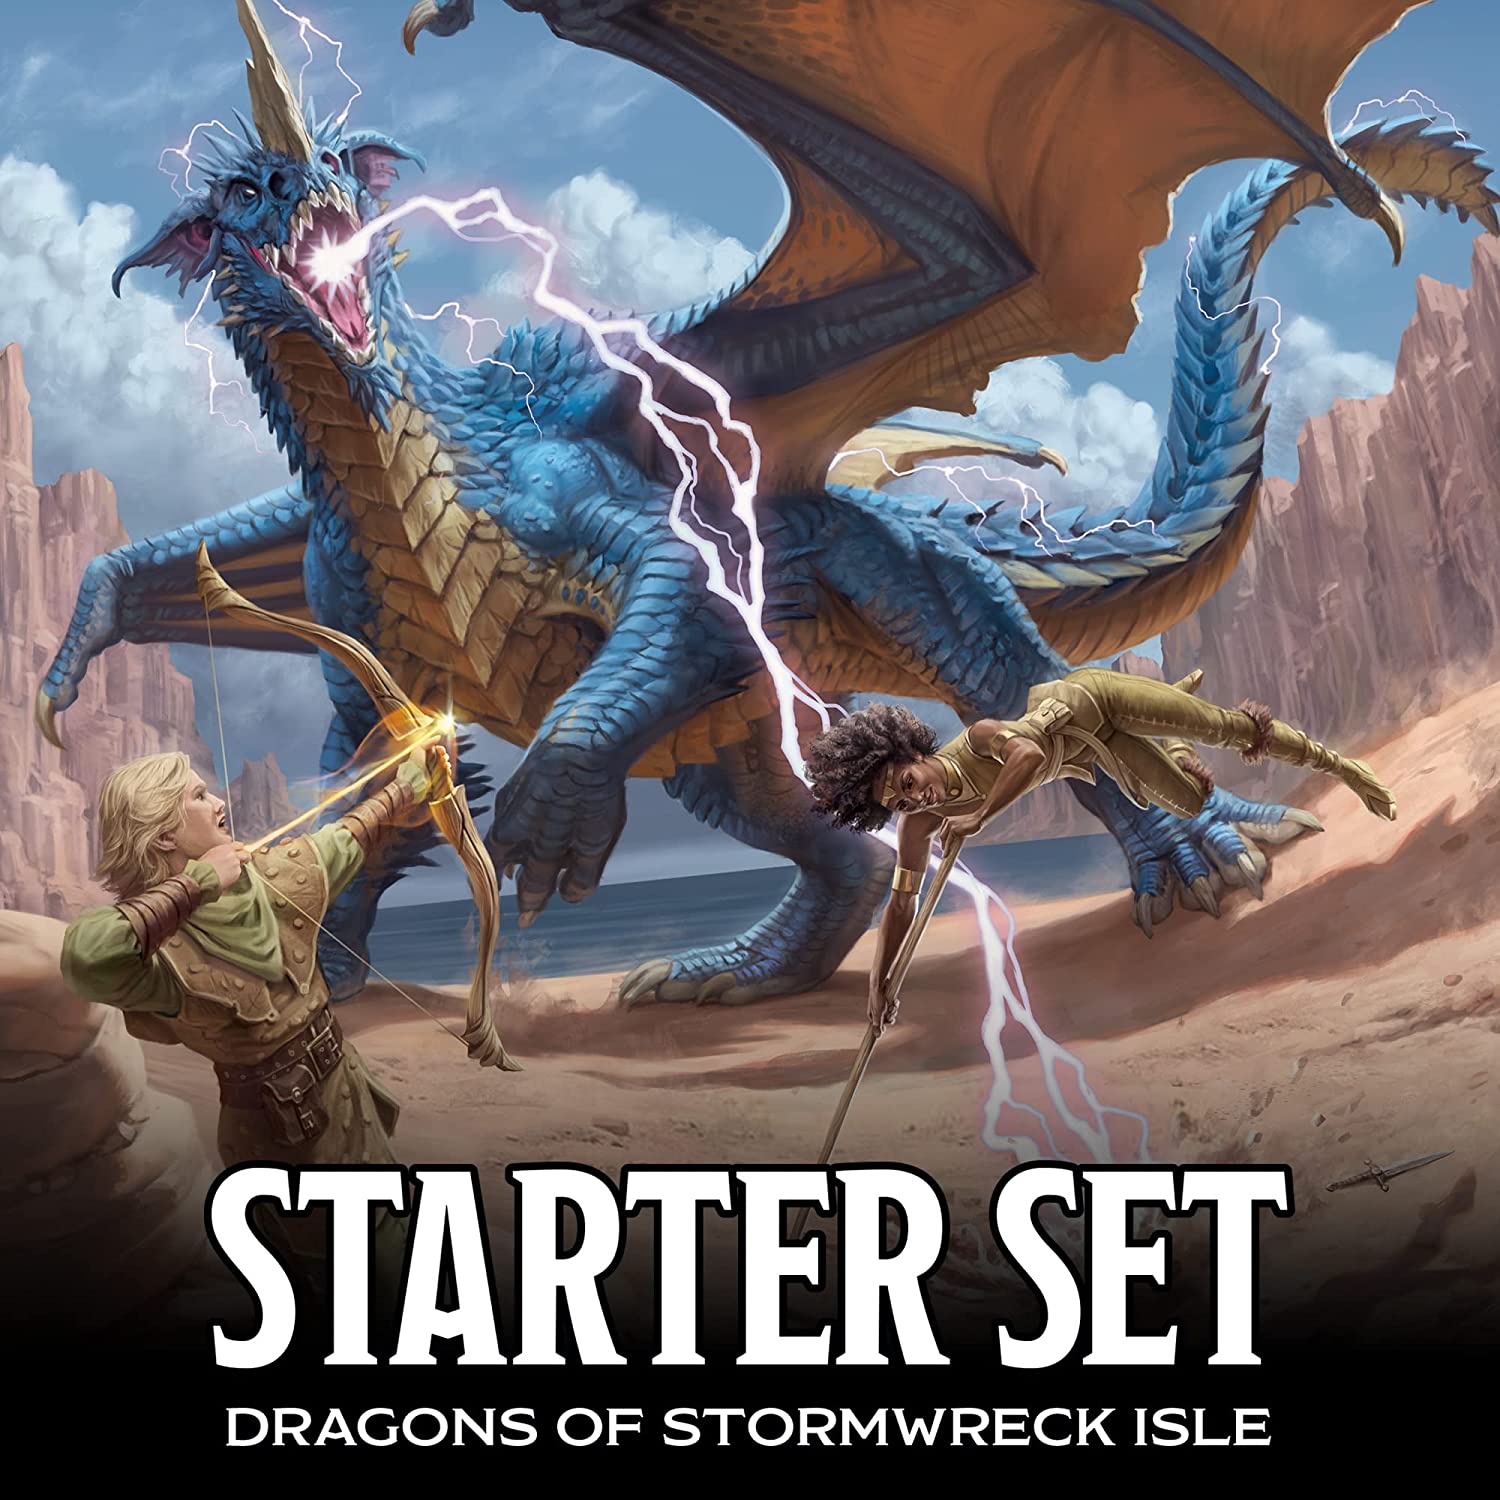 Dragons of Stormwreck Isle